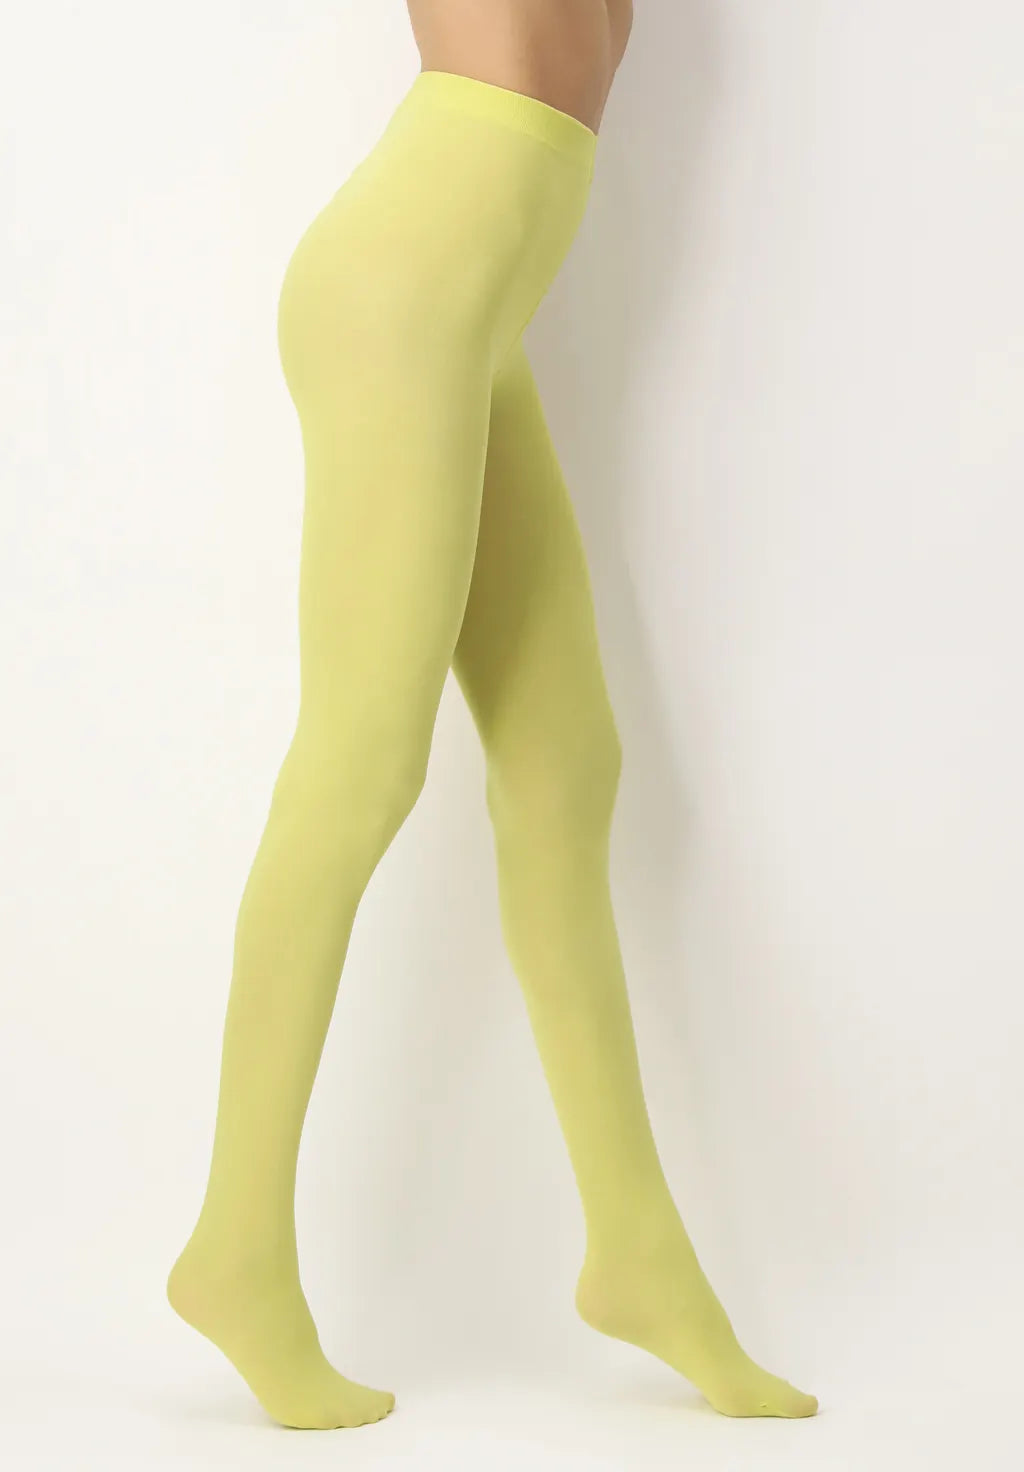 Oroblu All Colors 50 Den - Citrus Lemon (Lime) microfibre opaque tights with cotton gusset, flat seams and deep comfort waistband.